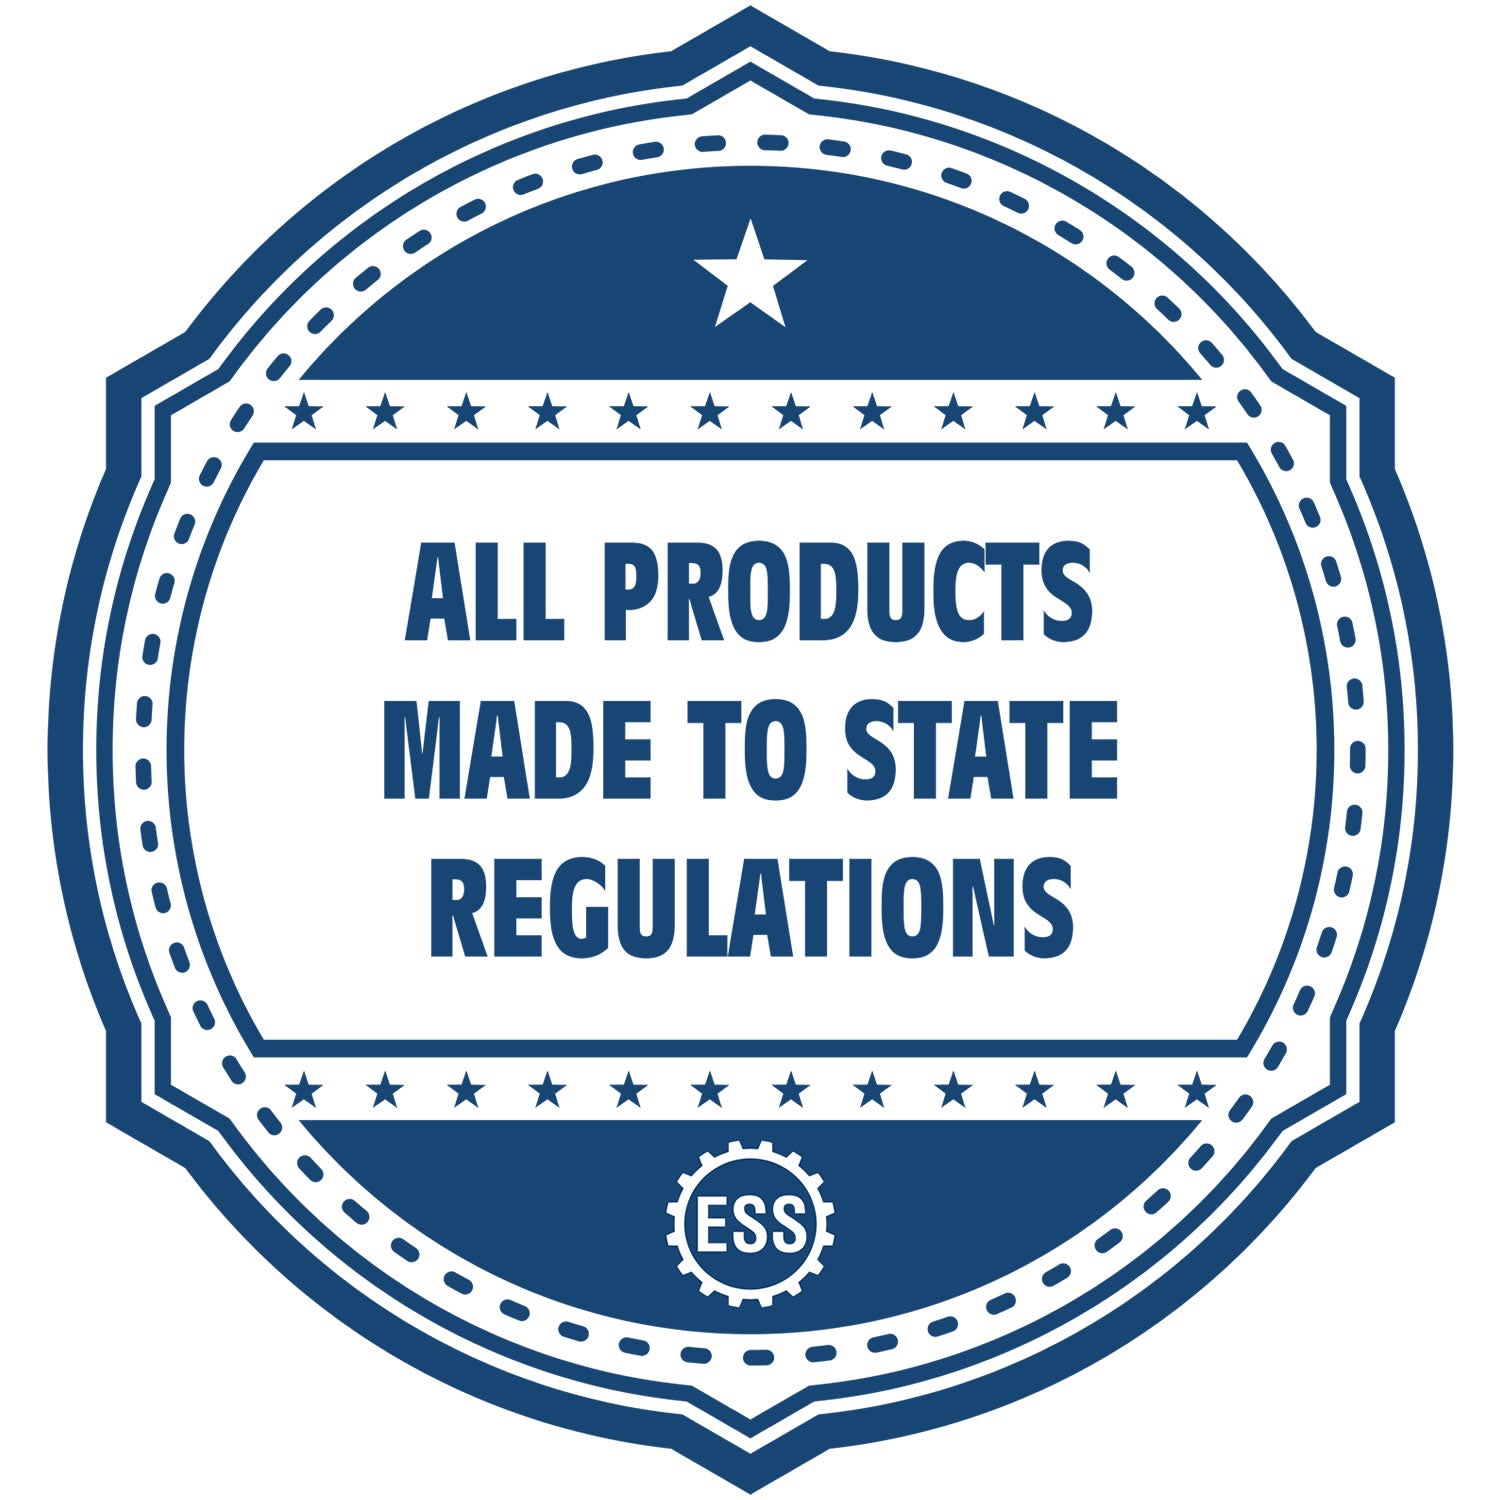 A blue icon or badge for the Gift Arkansas Architect Seal showing that this product is made in compliance with state regulations.